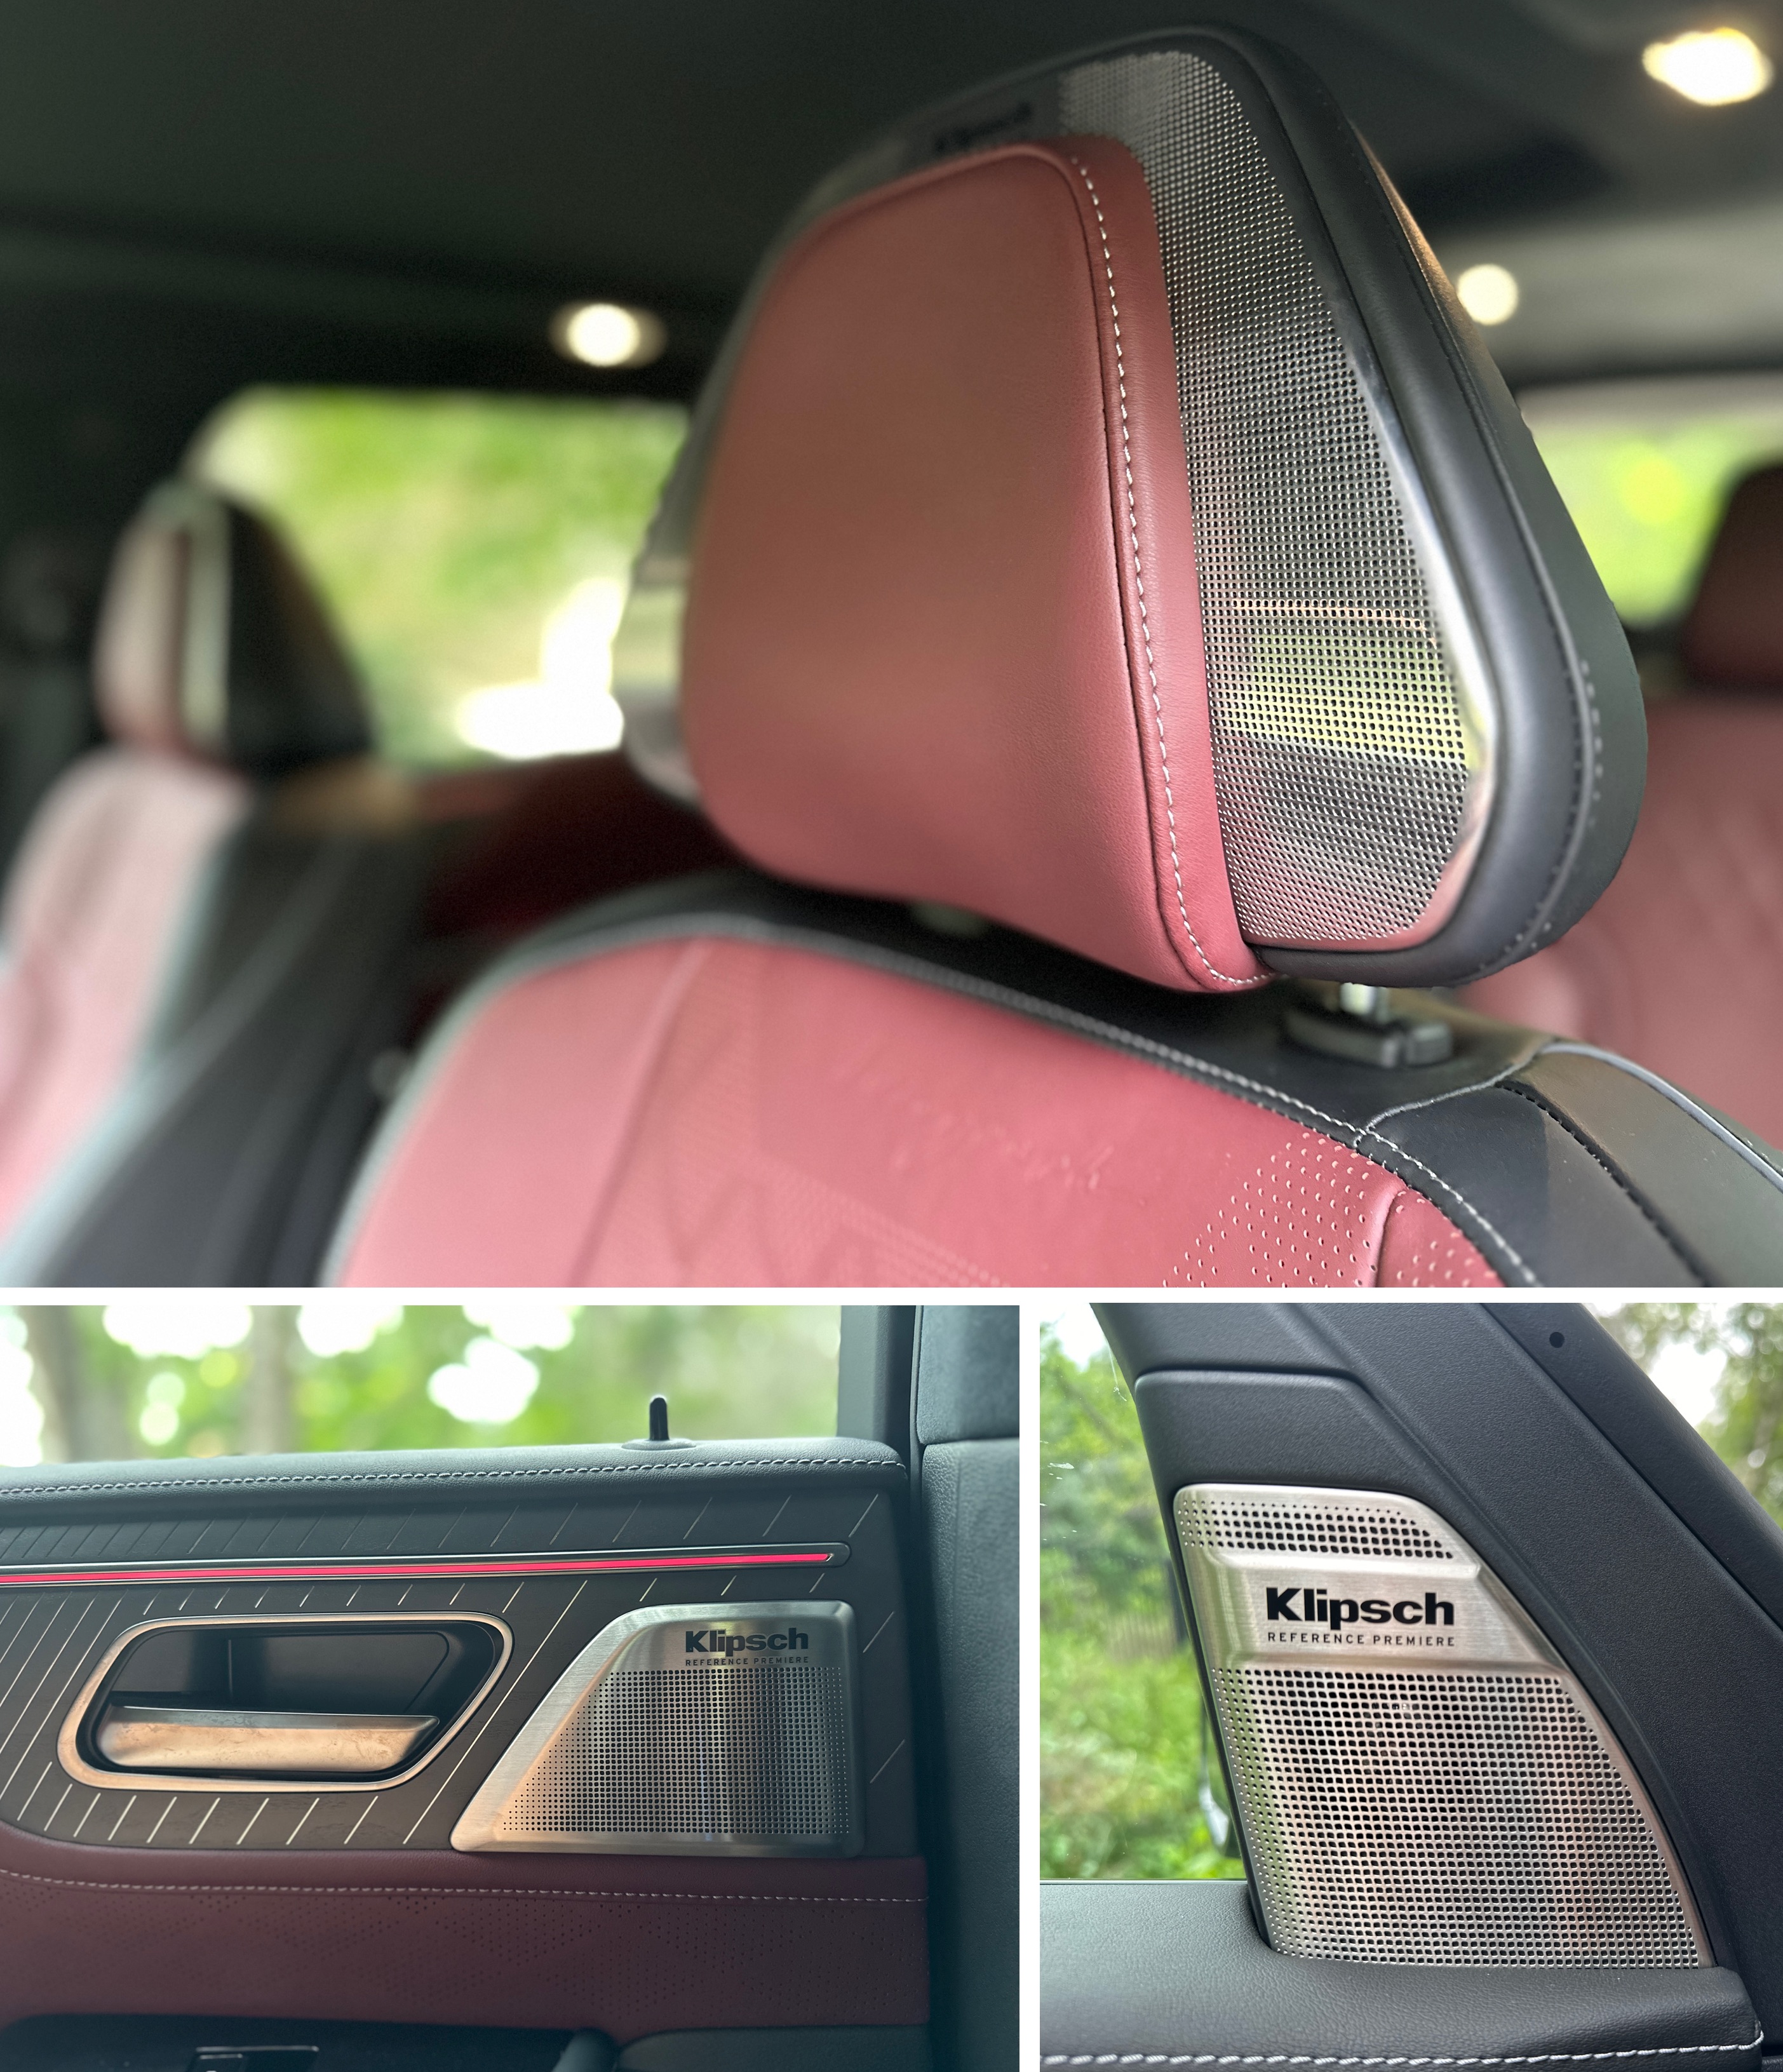 three images showing speakers inside the car, including on the door and in the head rest